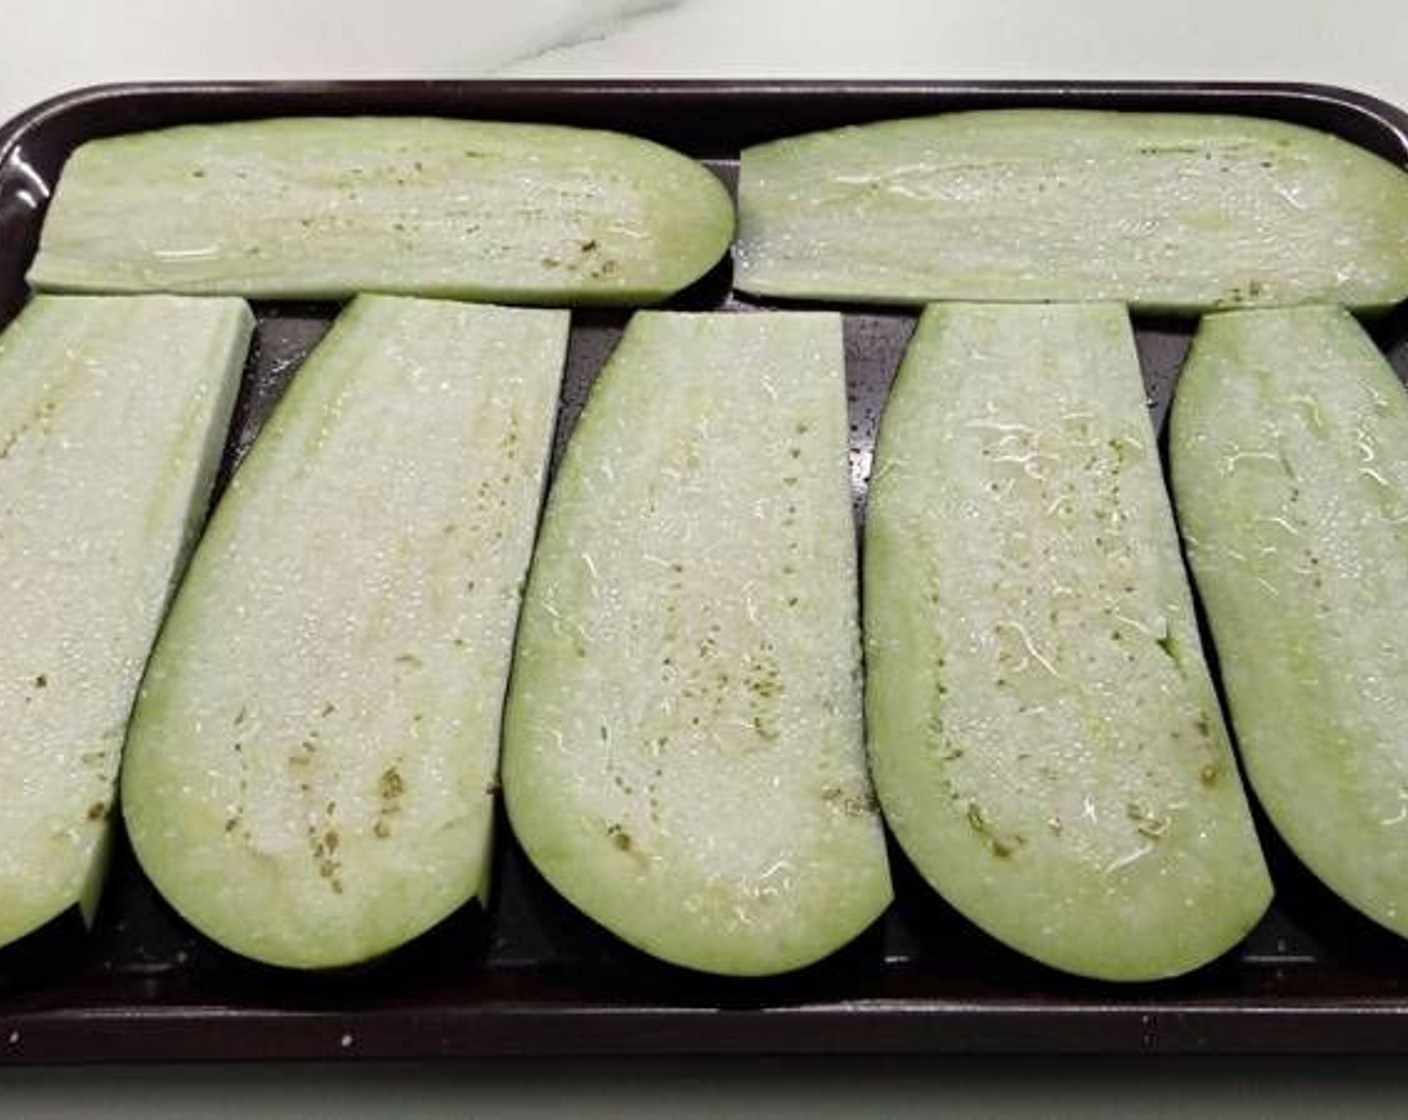 step 2 On a baking tray, lay out the eggplant slices and season with Salt (to taste). Let them sit for around 20 minutes so the salt can draw out the moisture.